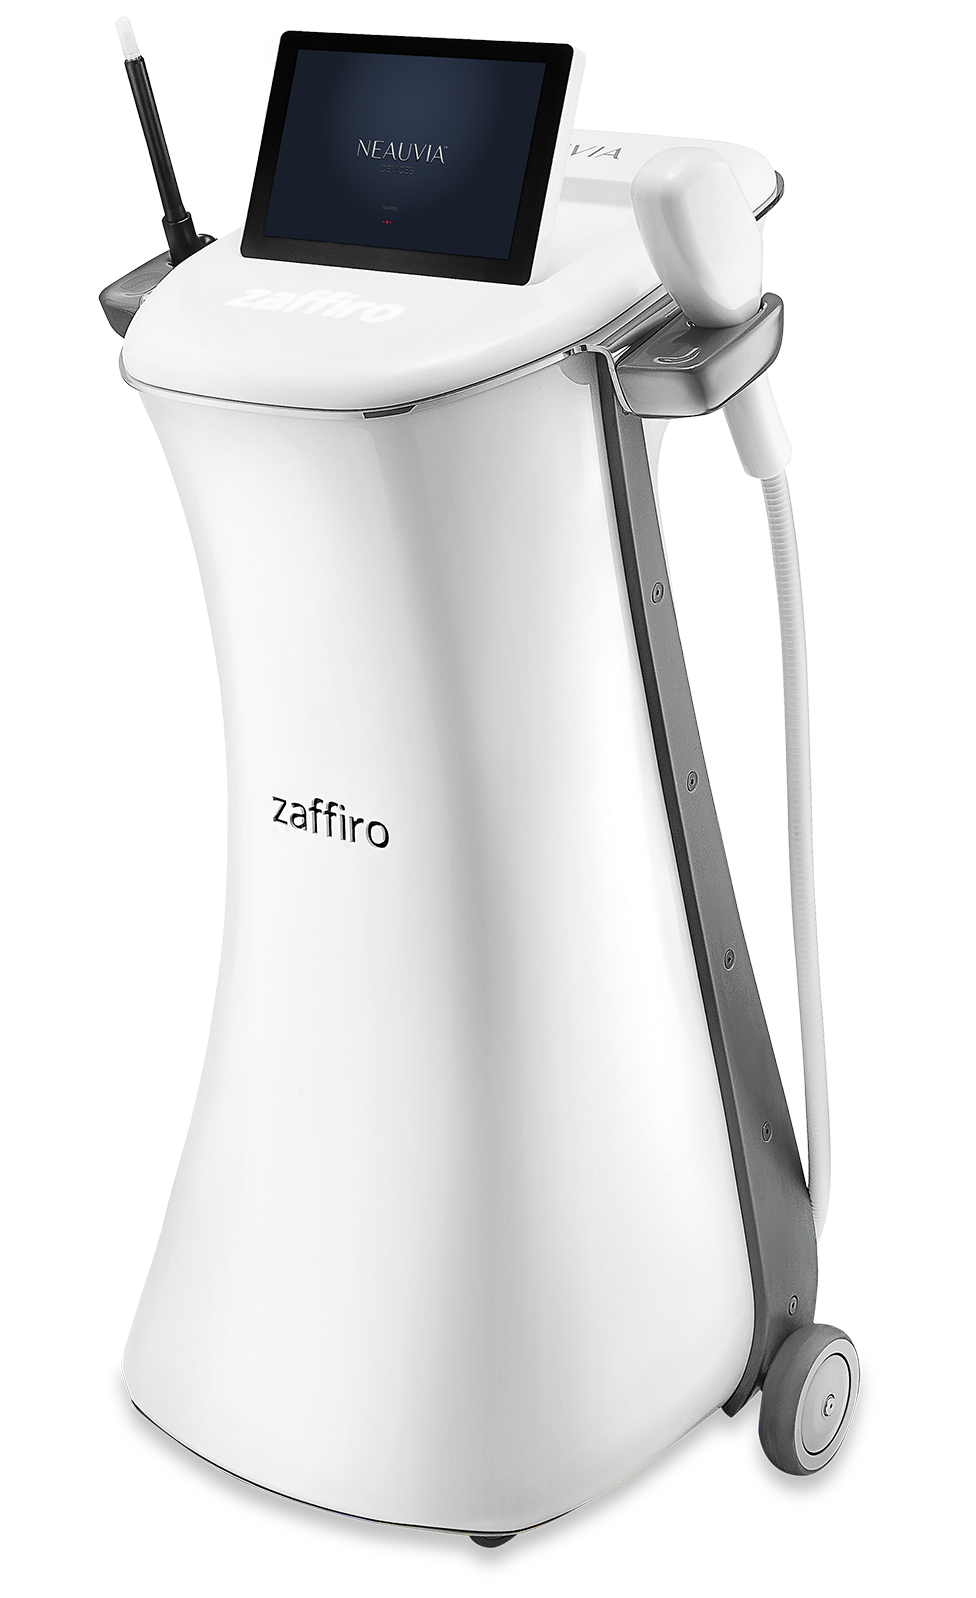 ZAFFIRO is an innovative medical device that combines hydro-exfoliation and near-infrared thermo-lifting to brighten and tighten the skin